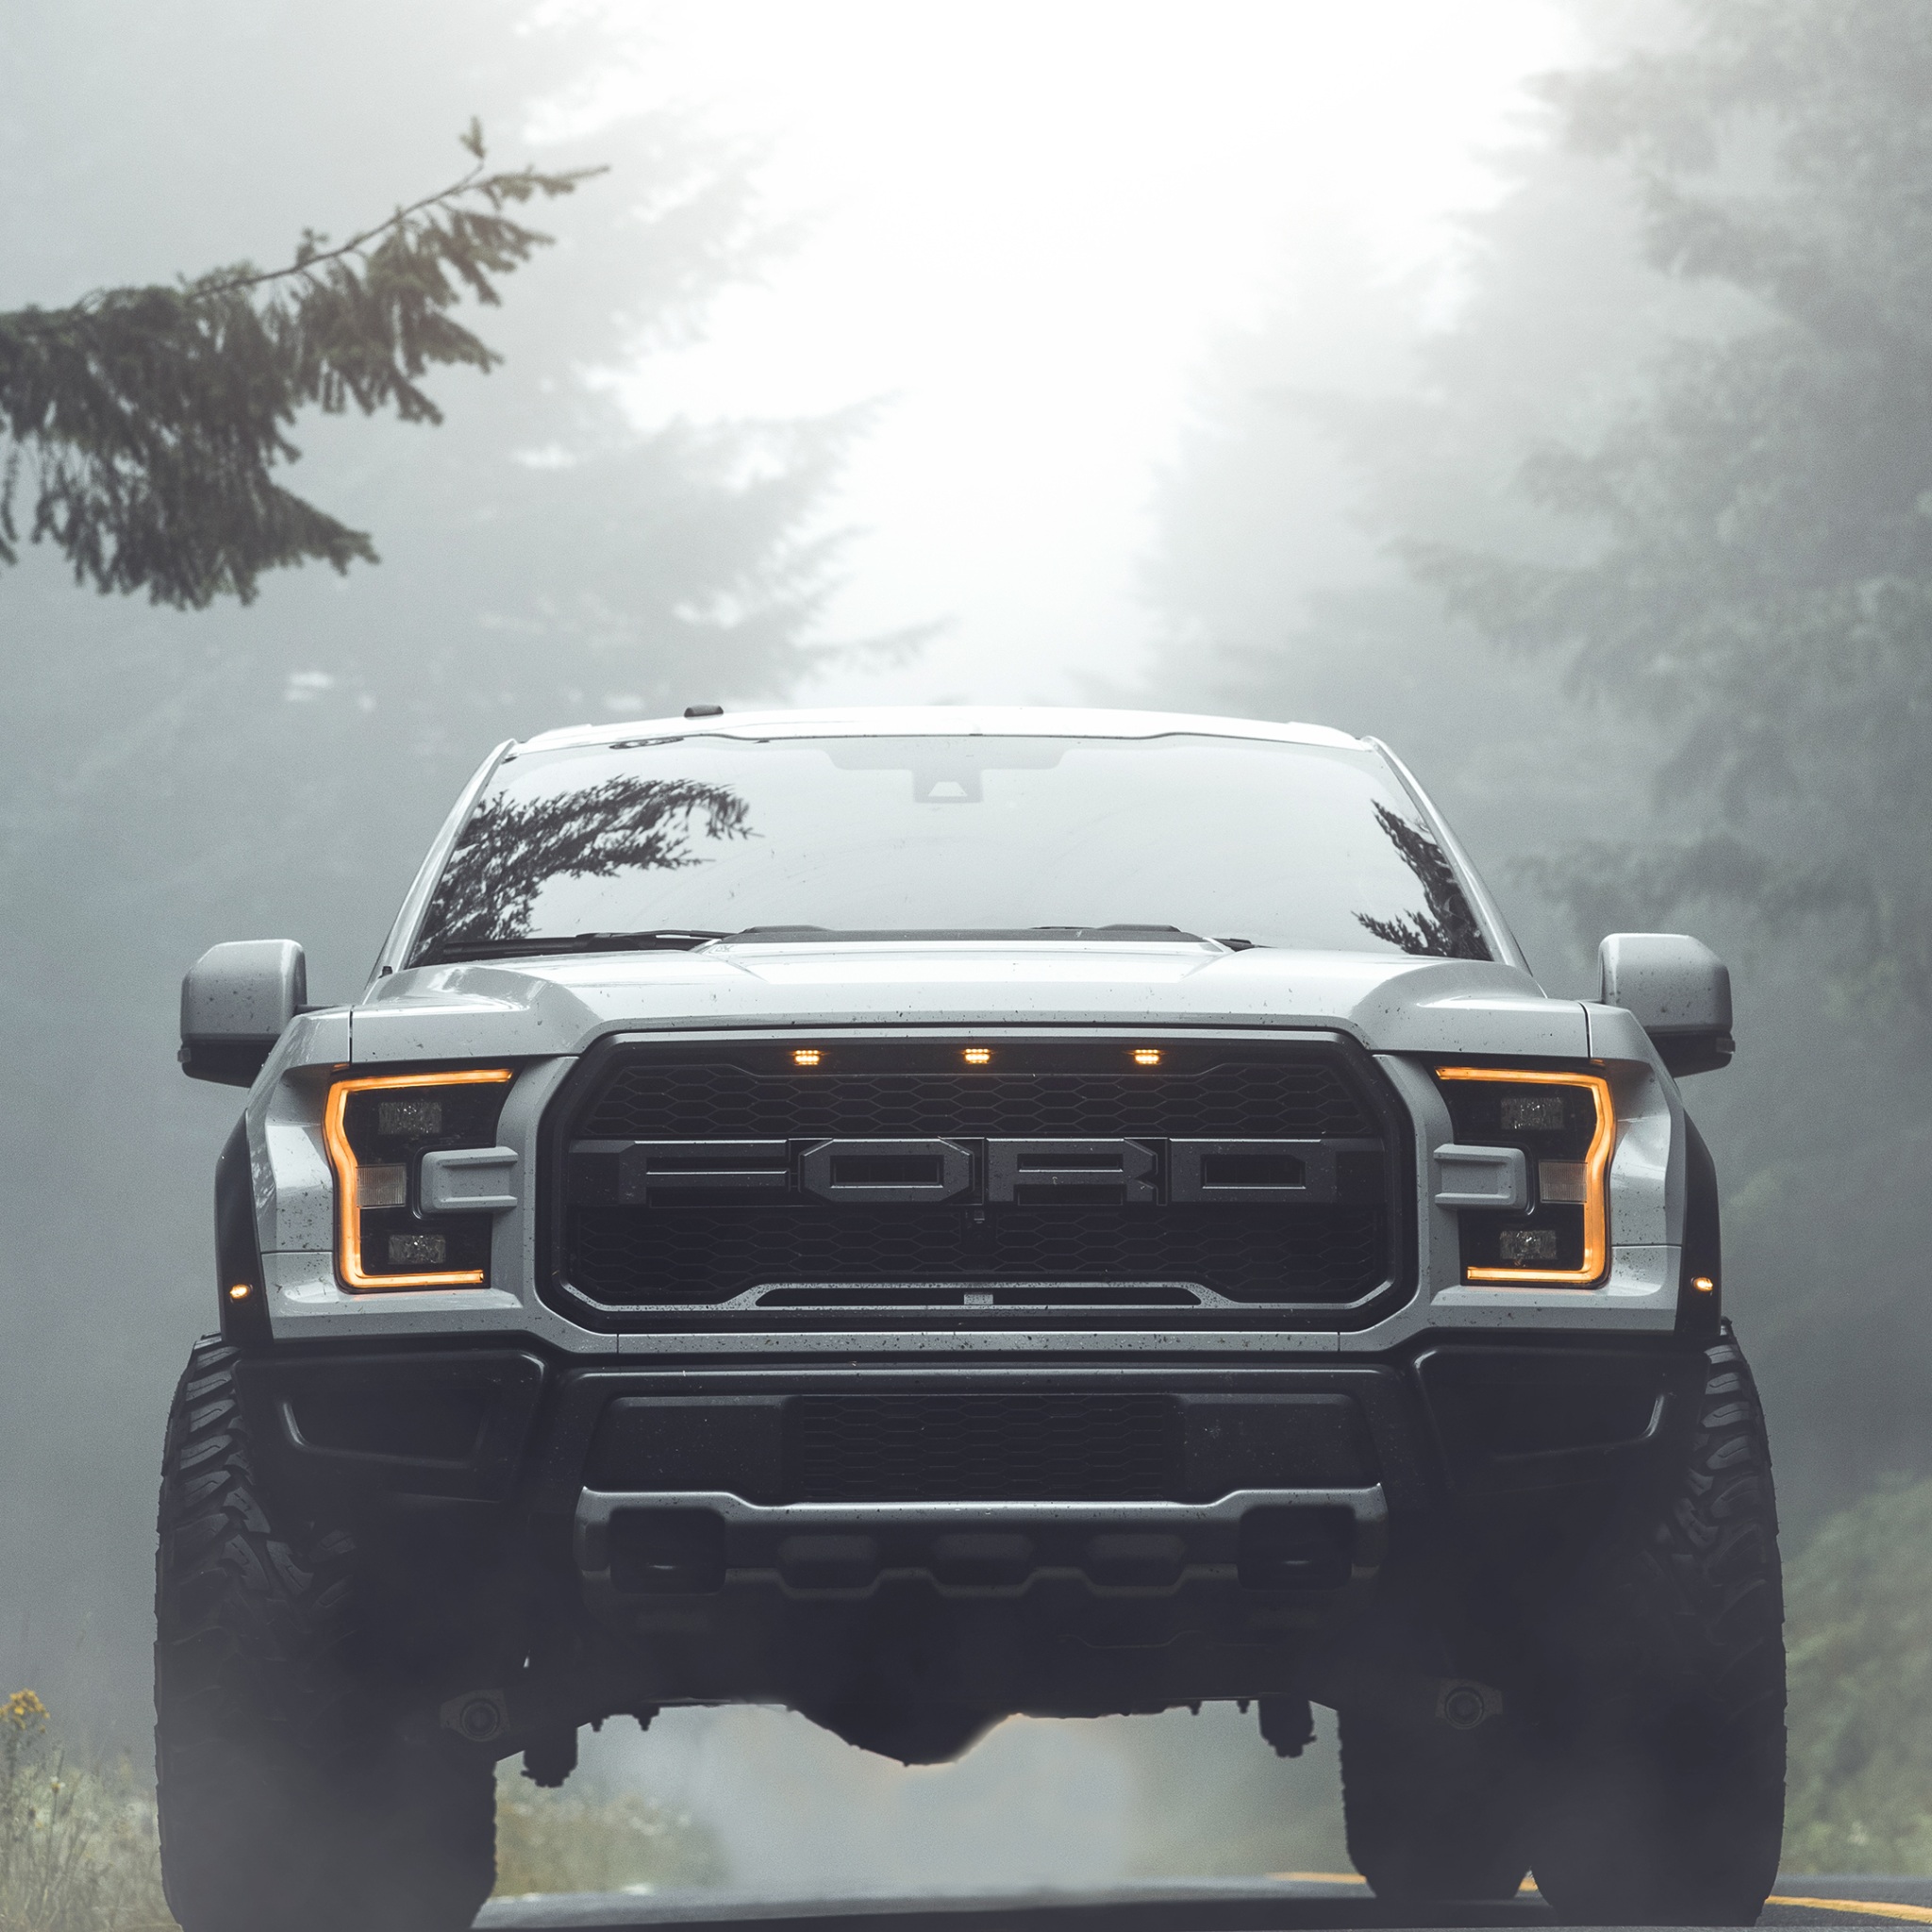 Ford Raptor Iphone Wallpapers